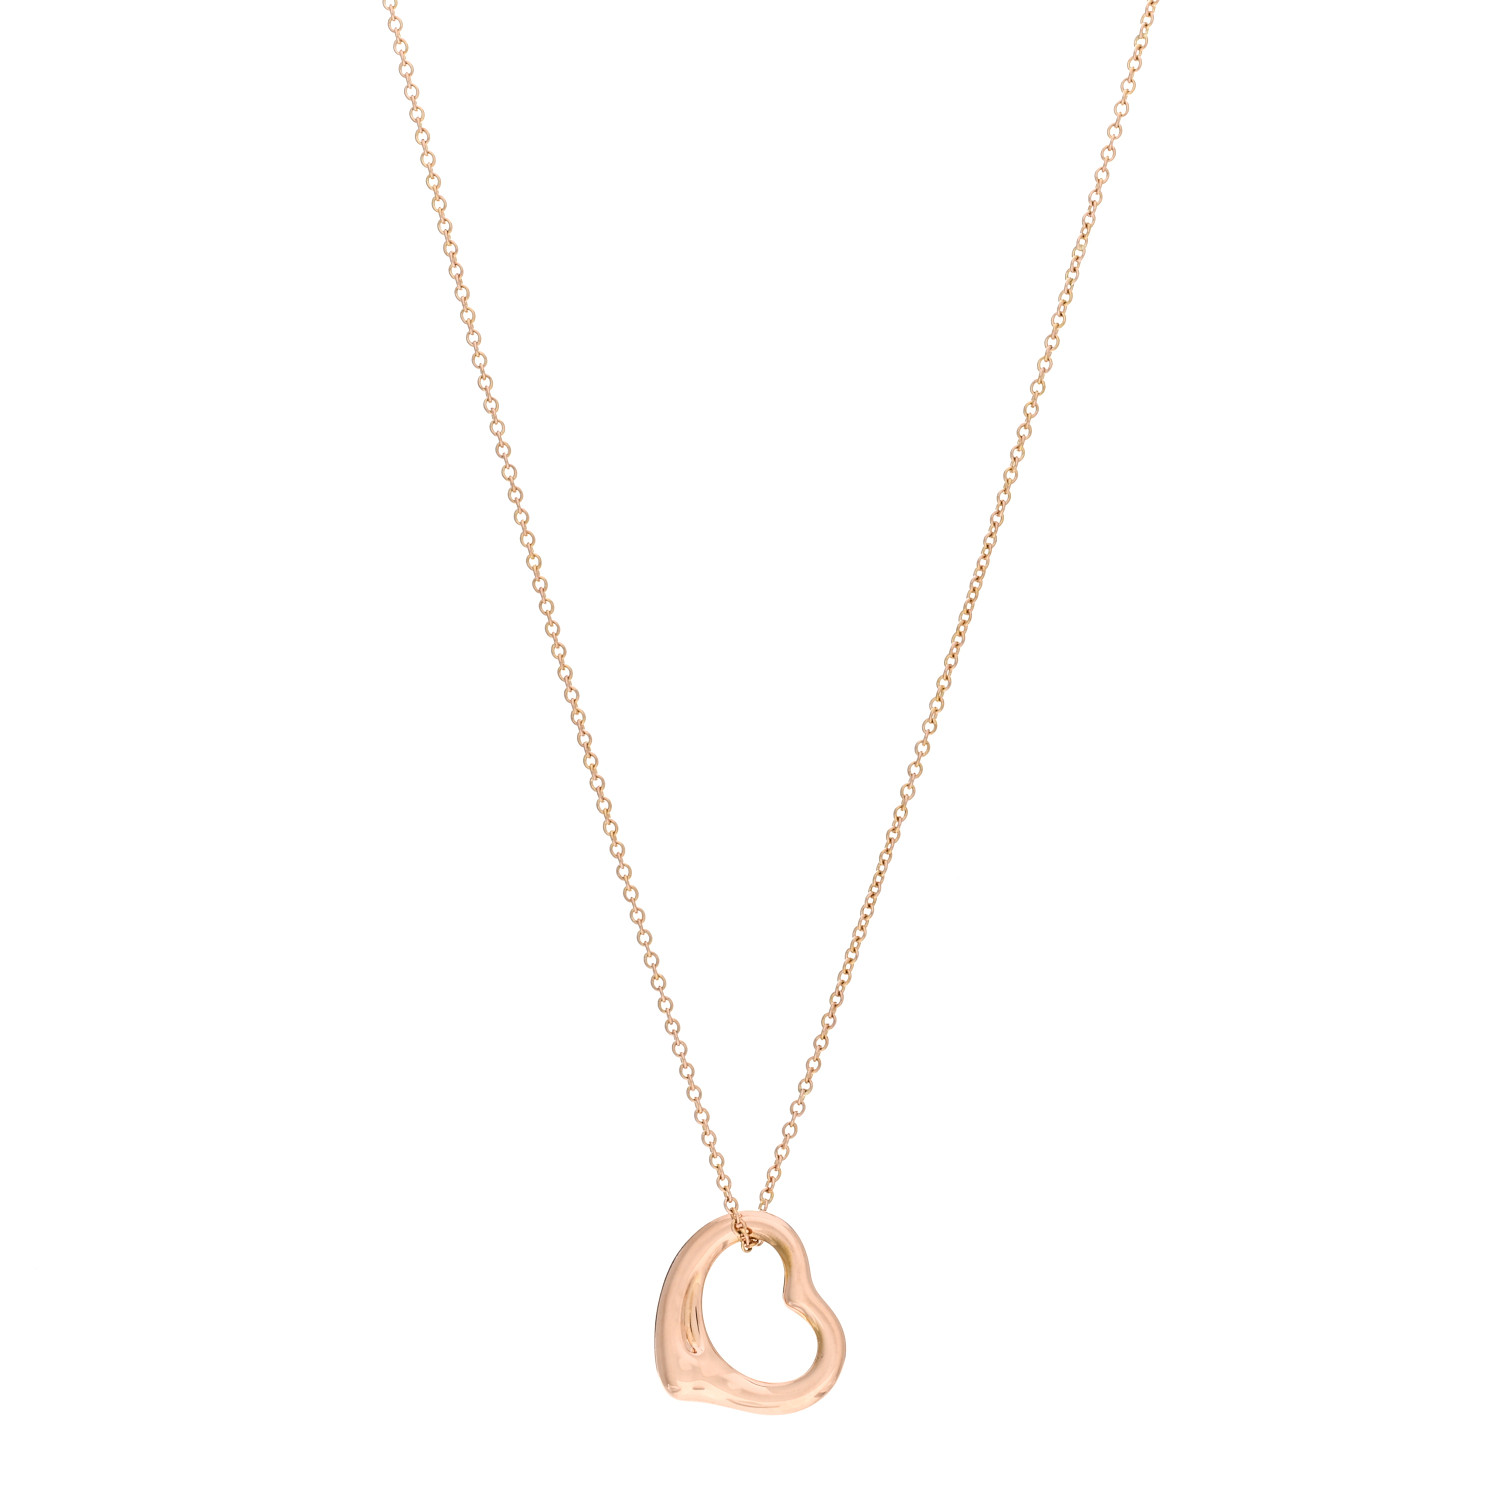 image of a TIFFANY 18K Rose Gold 16mm Elsa Peretti Open Heart Pendant Necklace by FASHIONPHILE